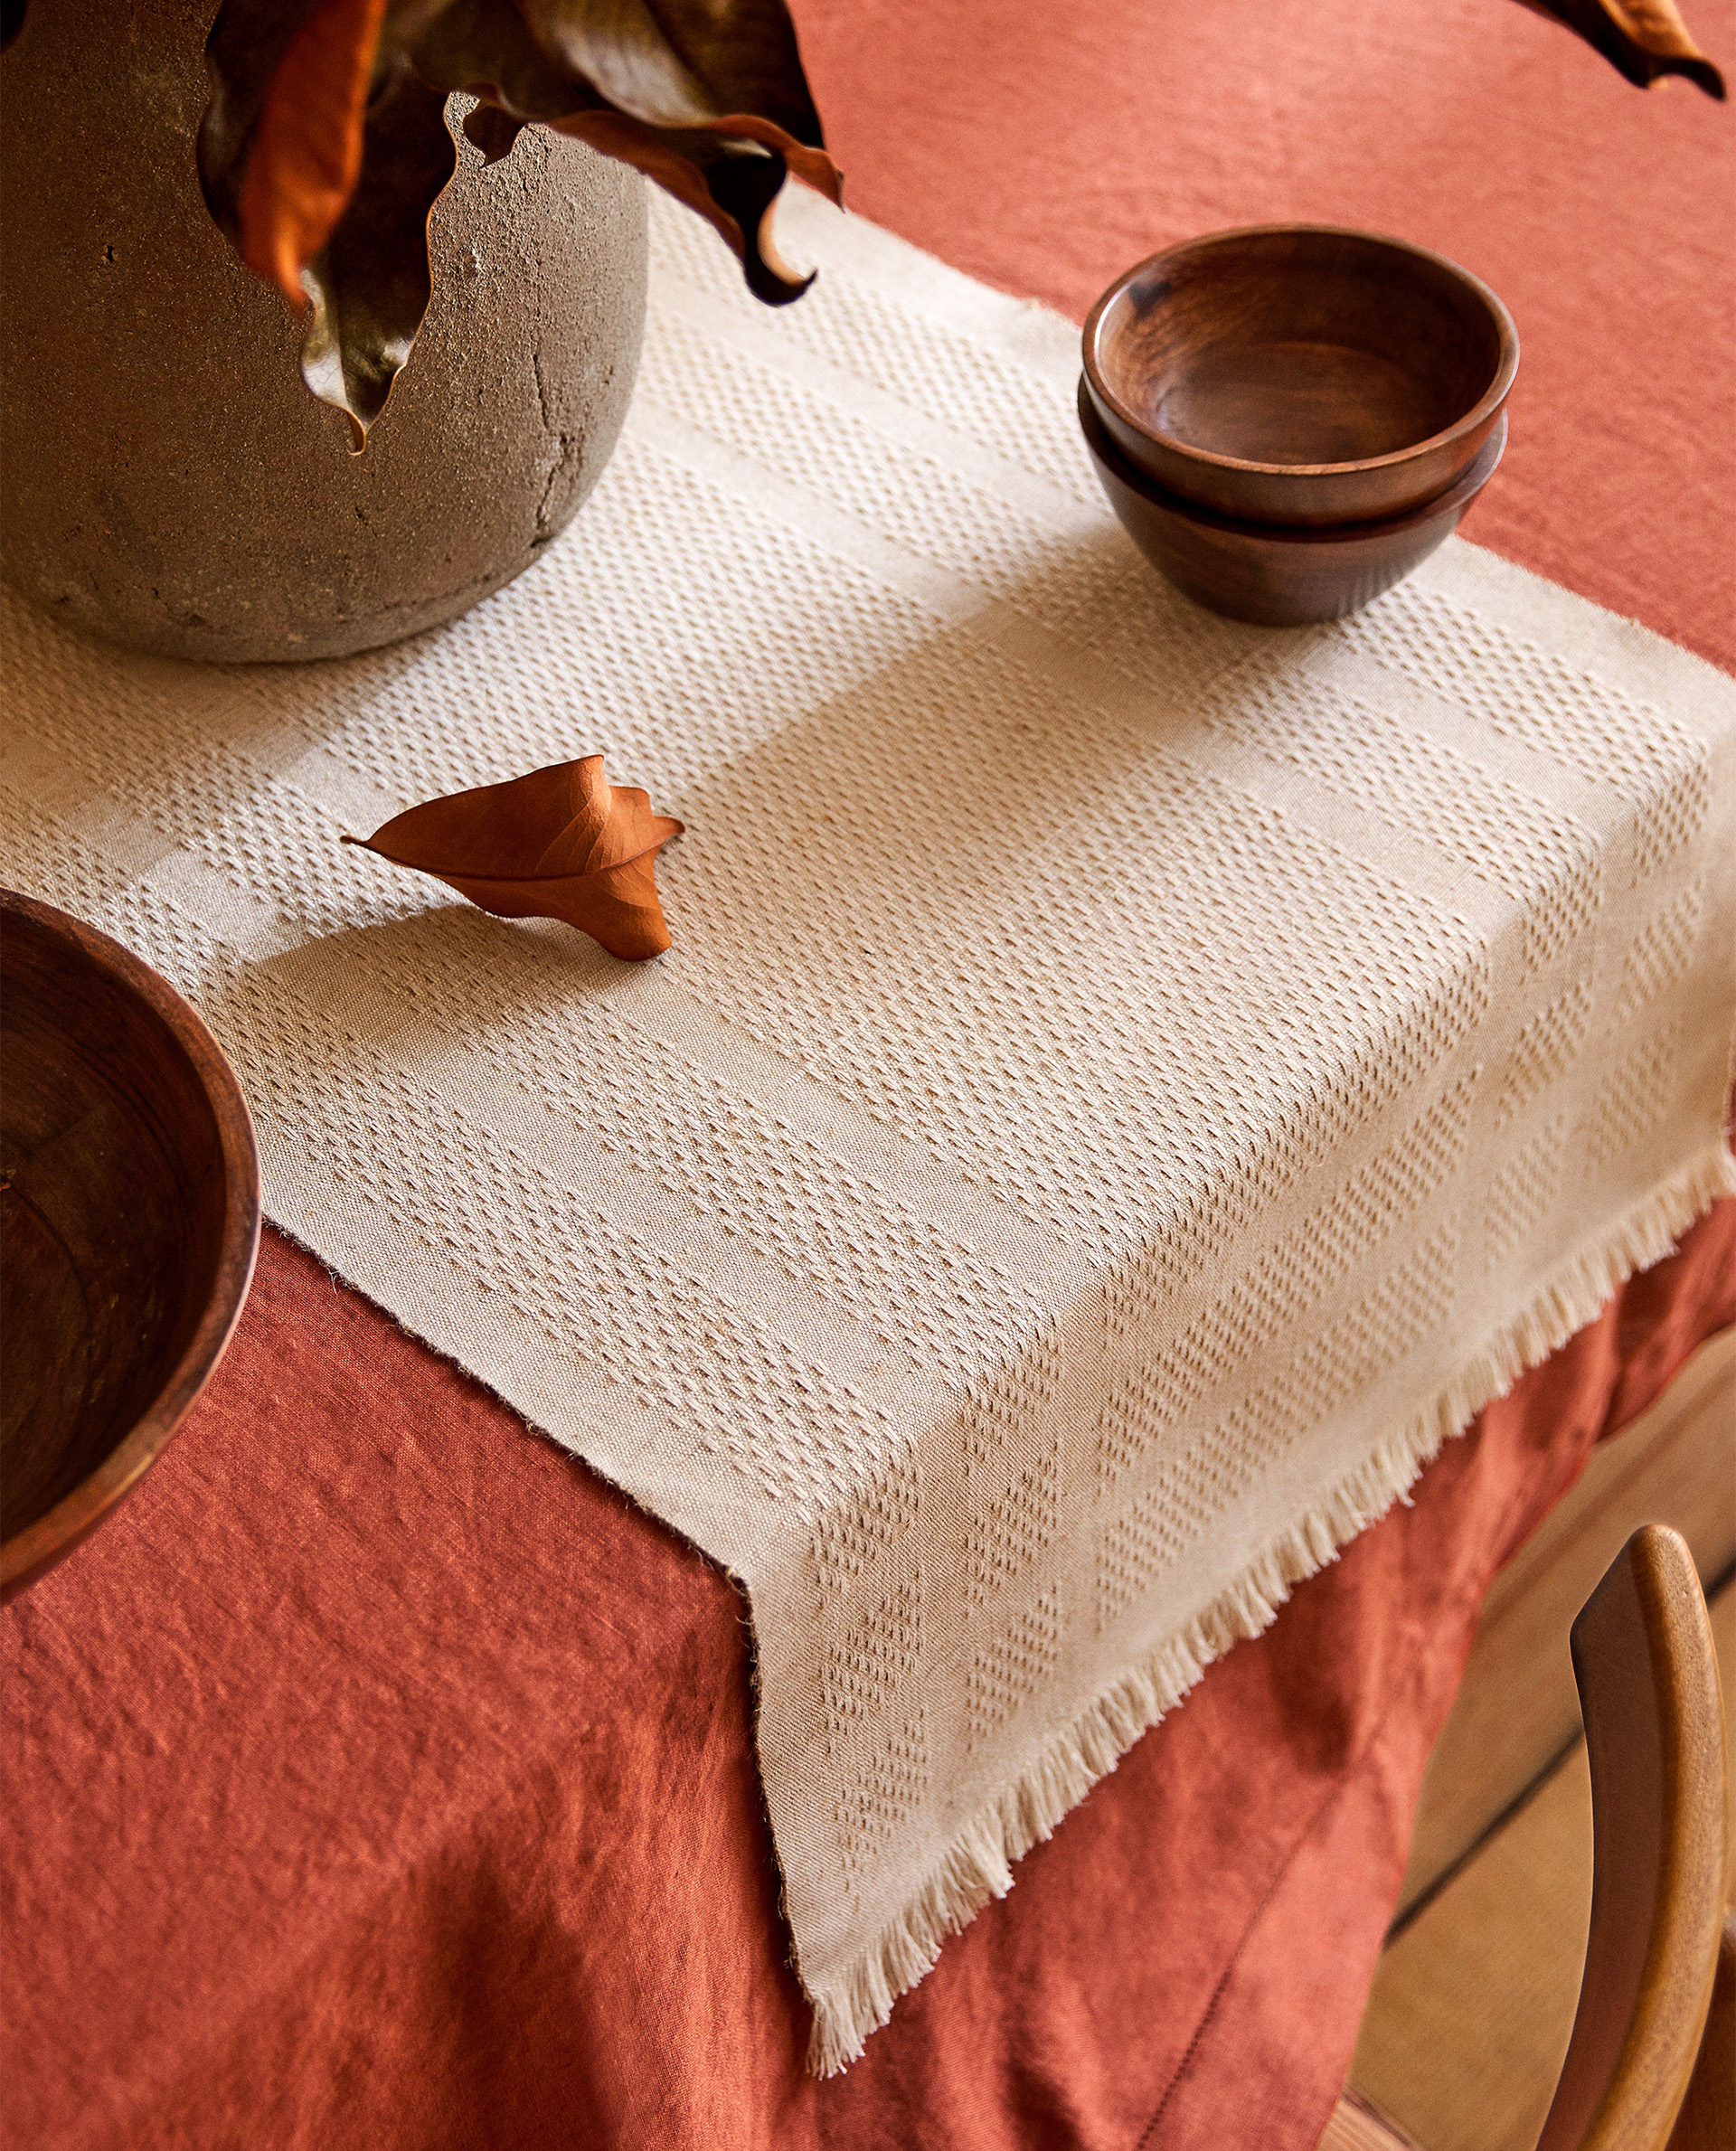 rustic table runners